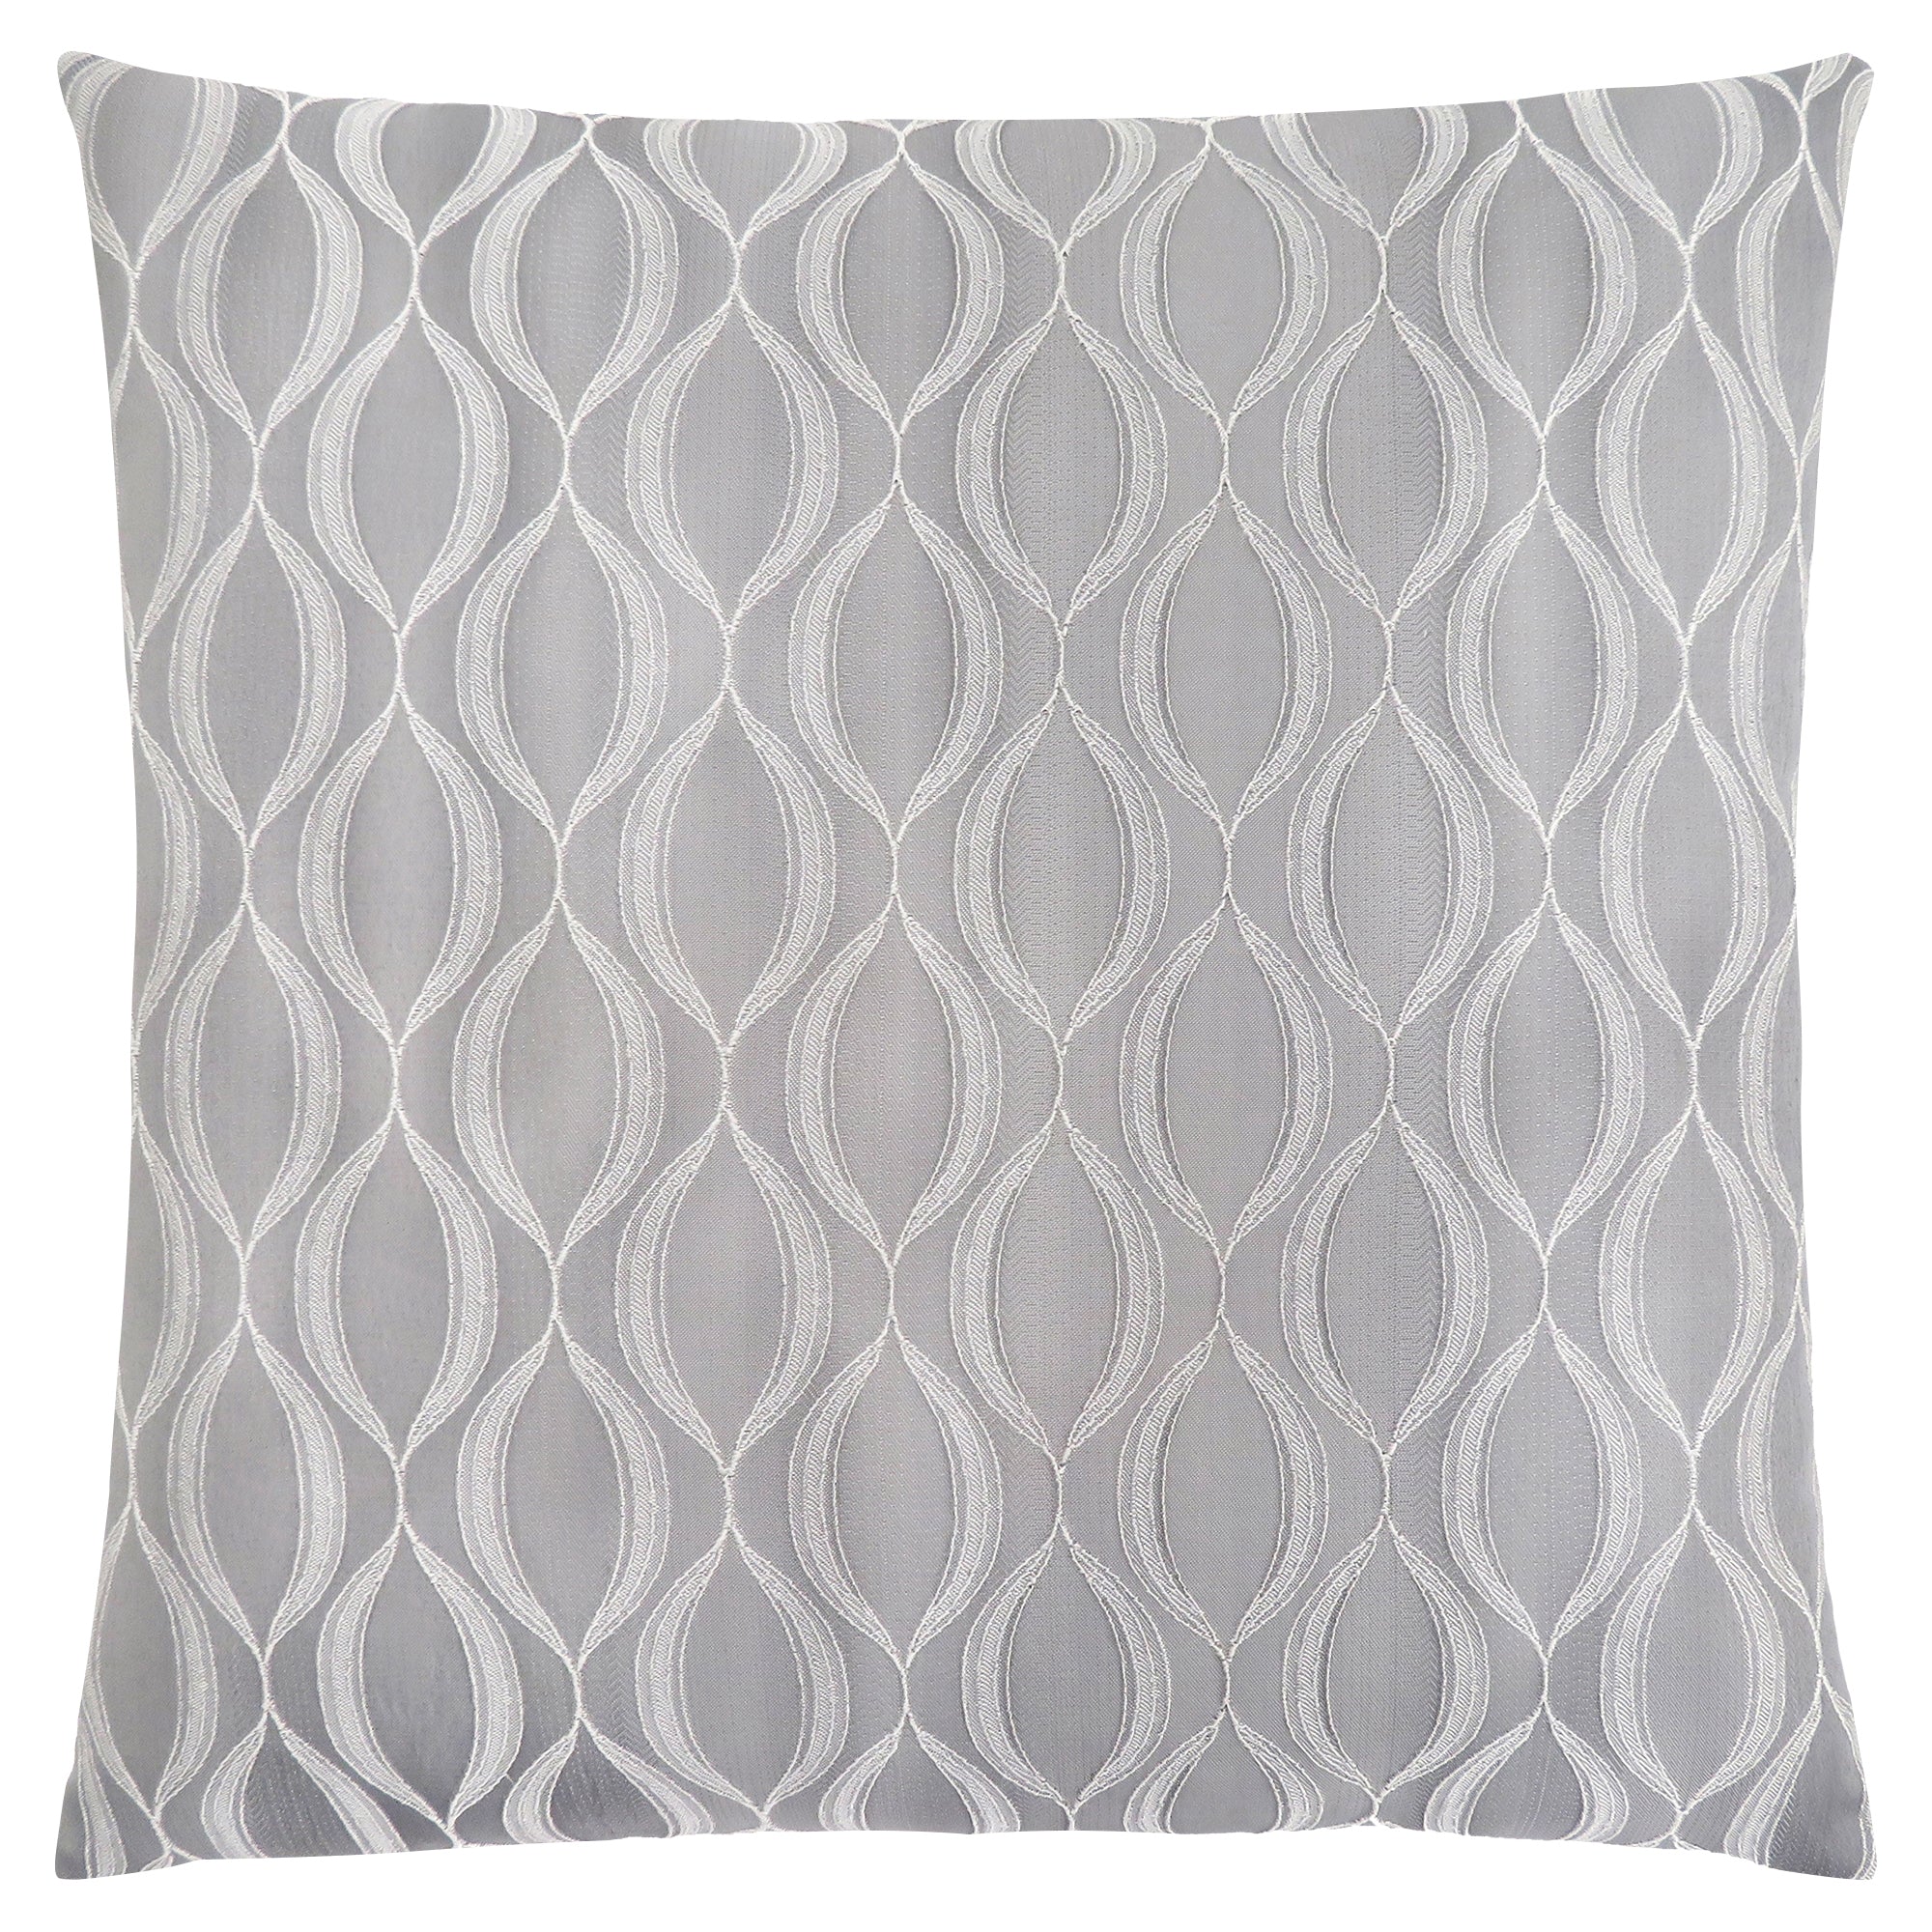 PILLOW - 18"X 18" / TAUPE WAVE PATTERN / 1PC